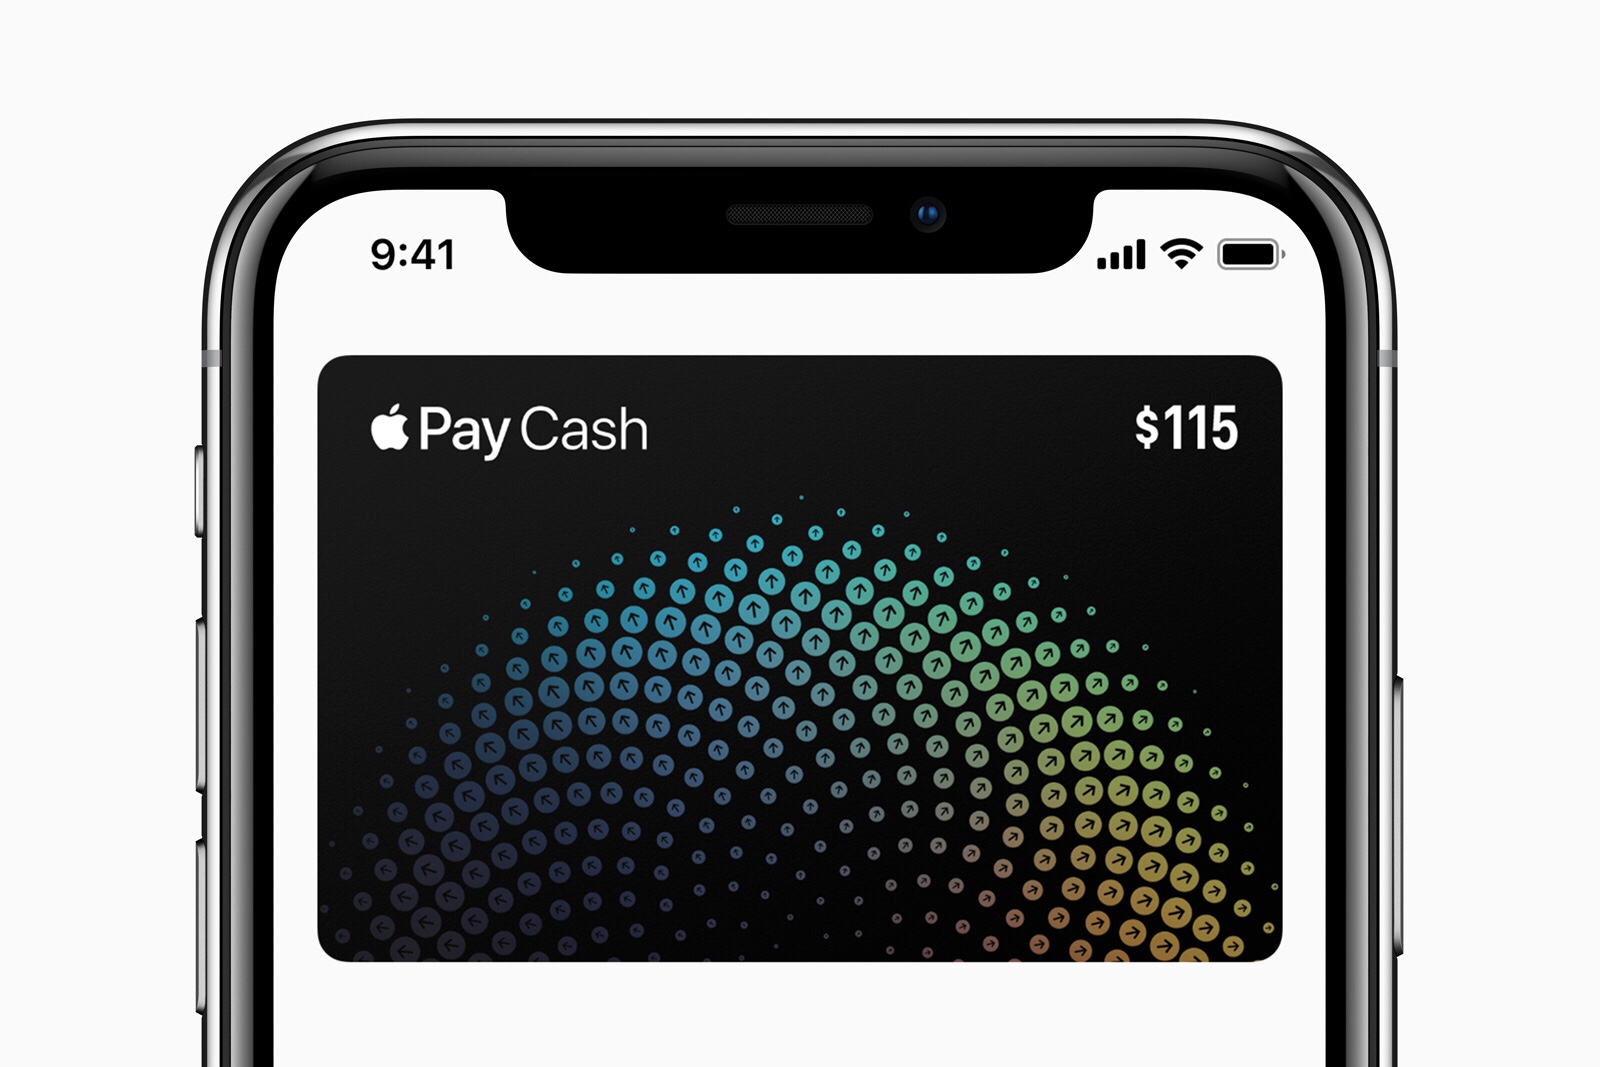 Apple Pay Cash may be nearing an international expansion